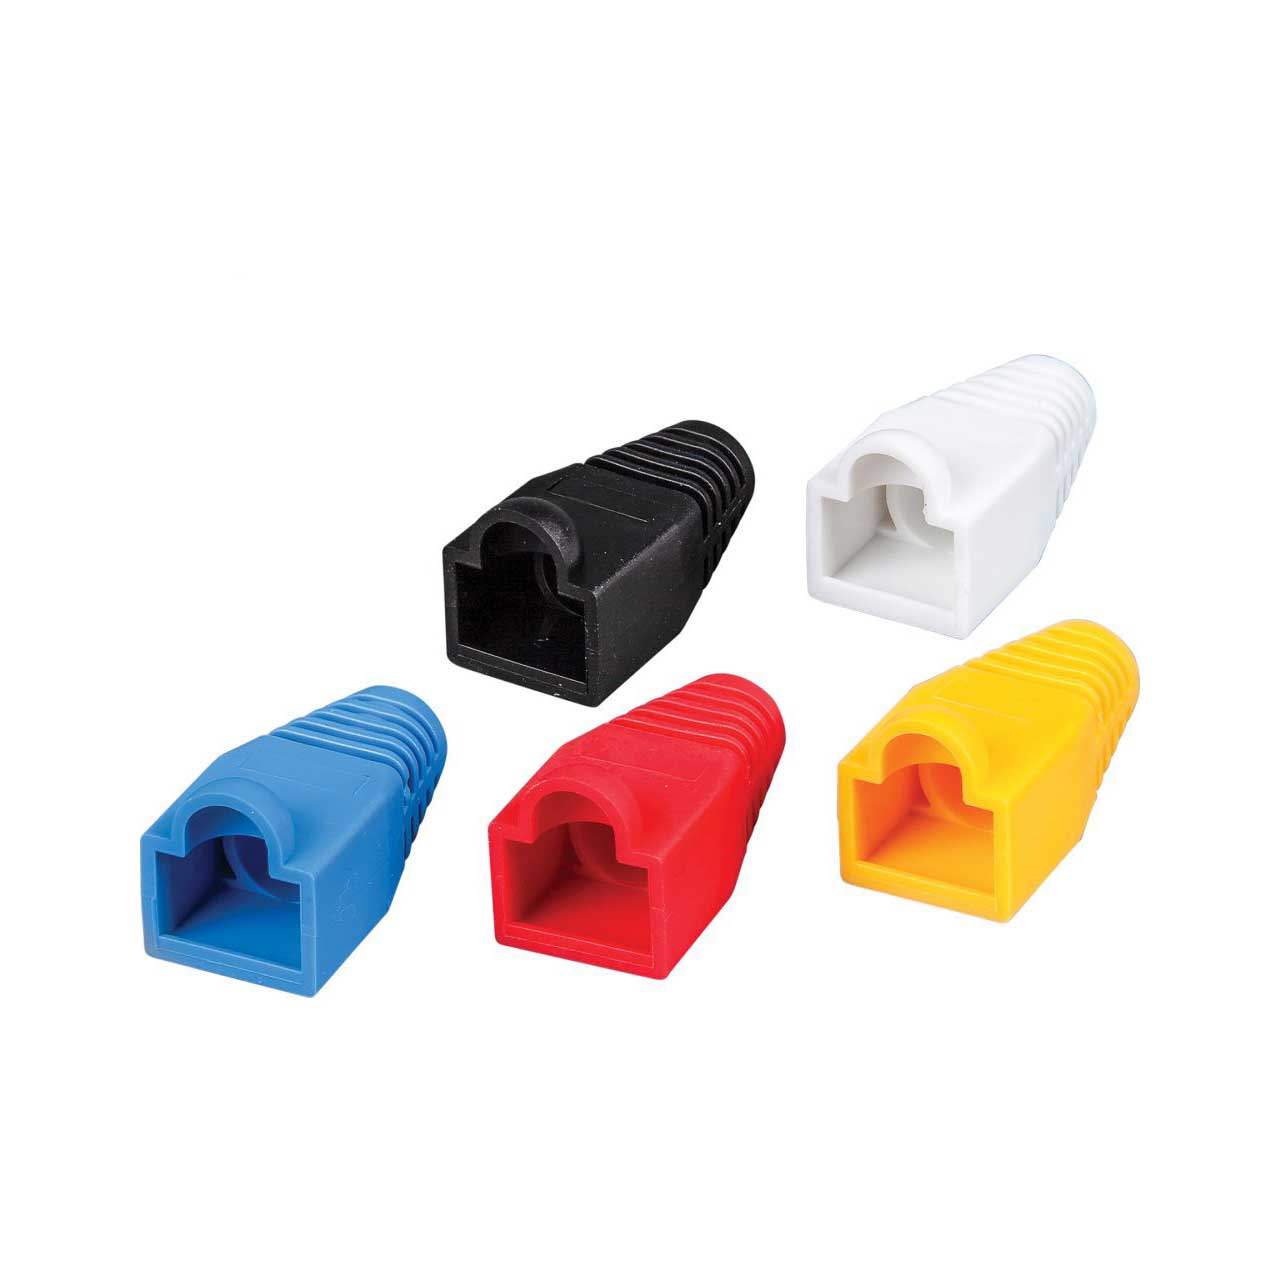 Klein Tools VDV824-650 Strain Relief Boots for RJ45 Data Plugs - CAT5e/CAT6 Cable - 100-Pack VDV824-650